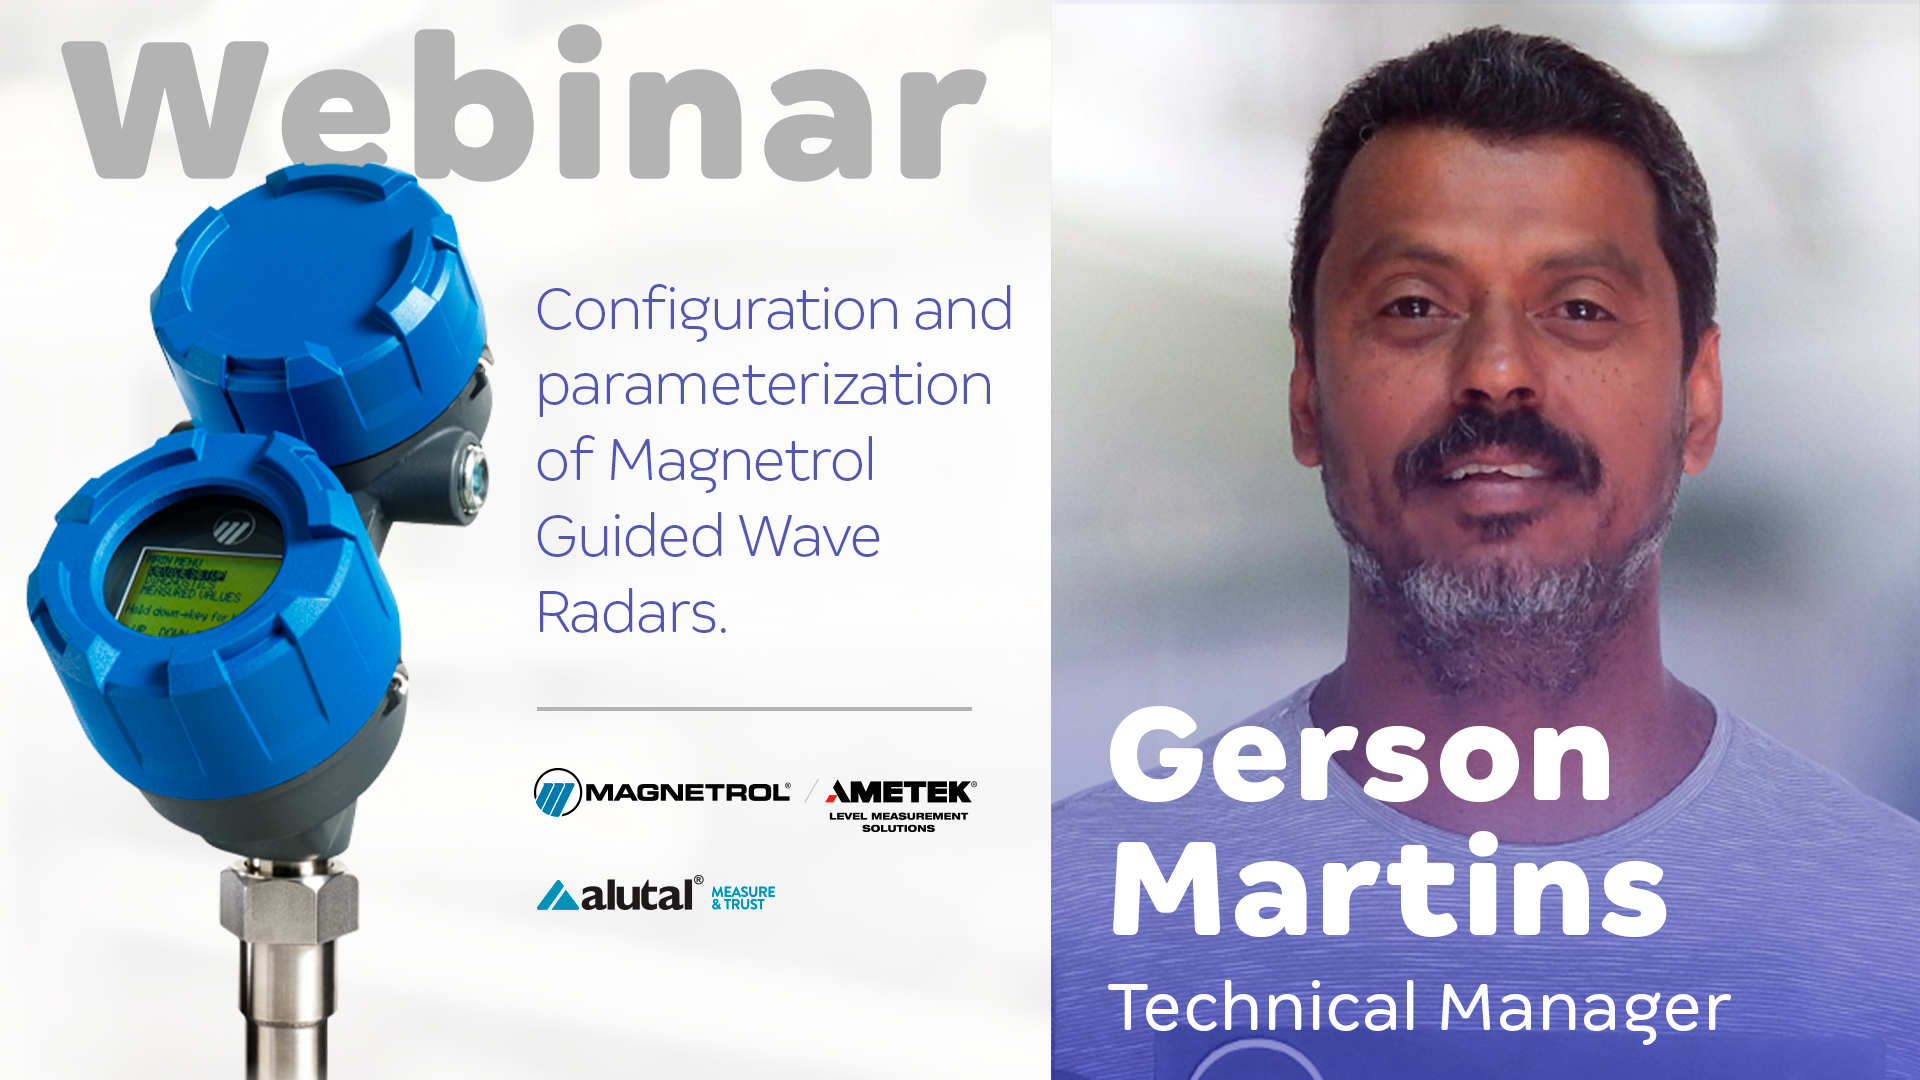 The technical webinar: Configuration and Parameterization of Magnetrol Guided Wave Radars.